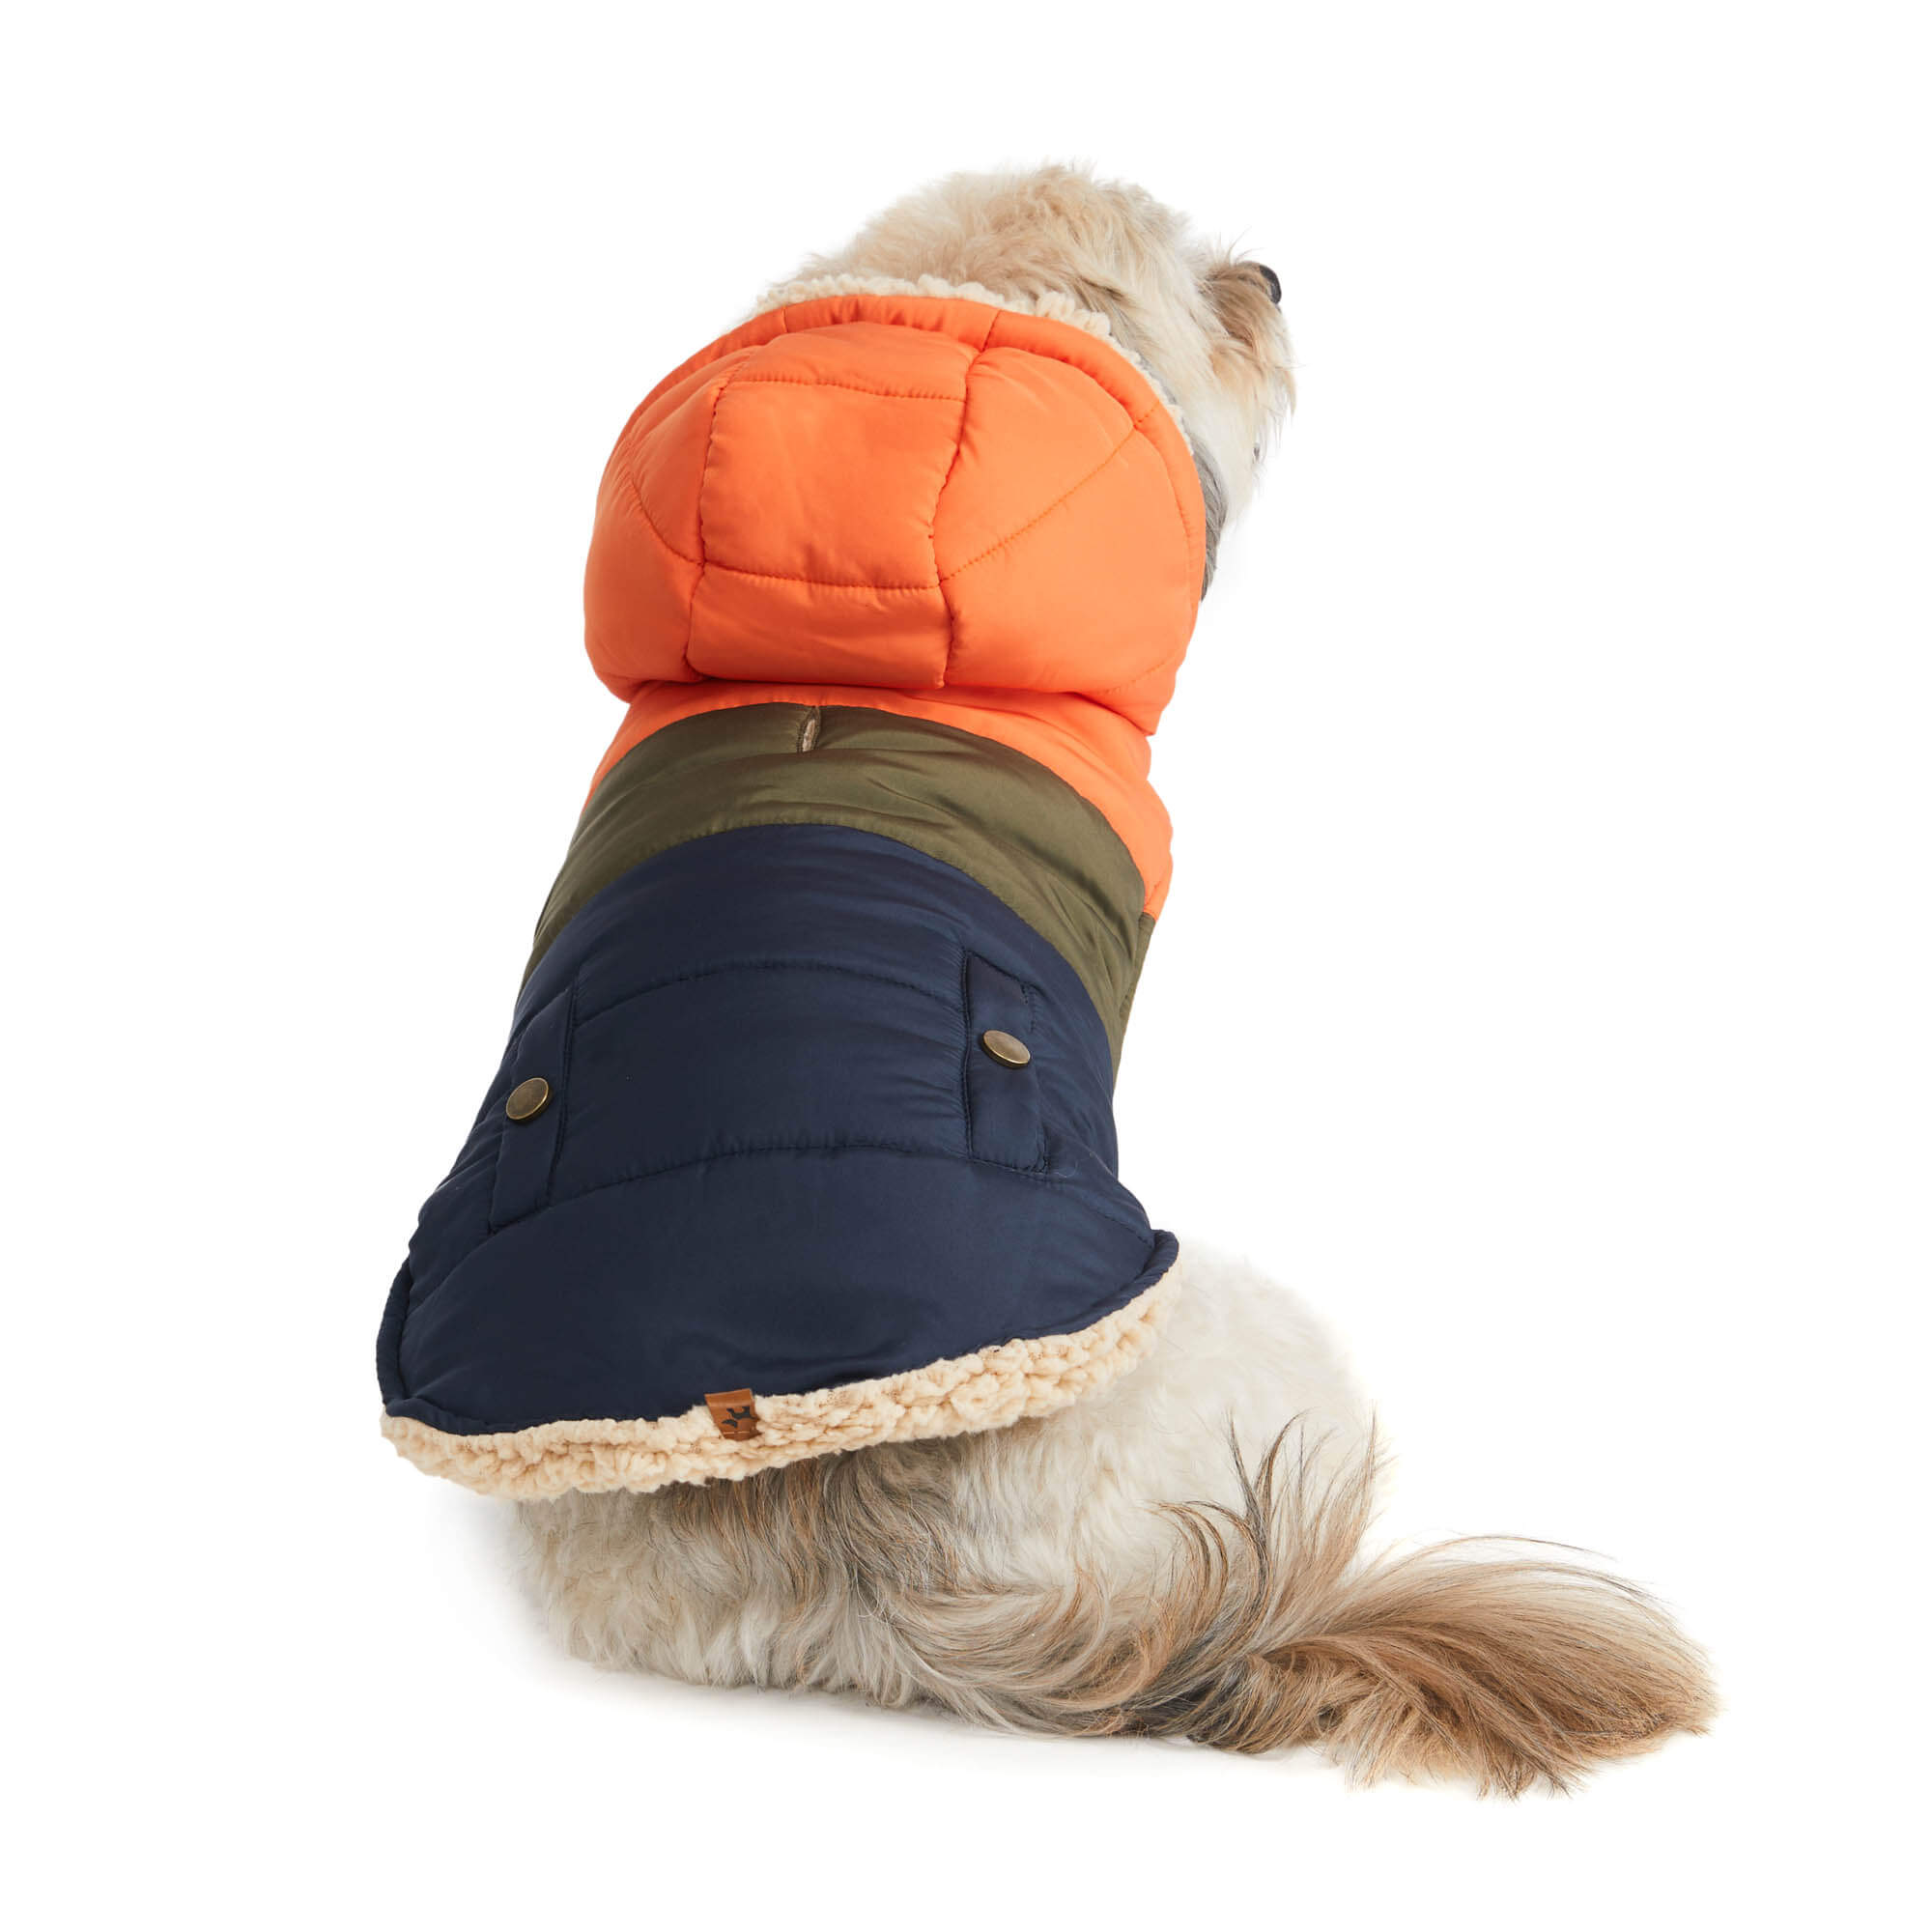 Dog wearing Hotel Doggy orang and blue parka. Back view